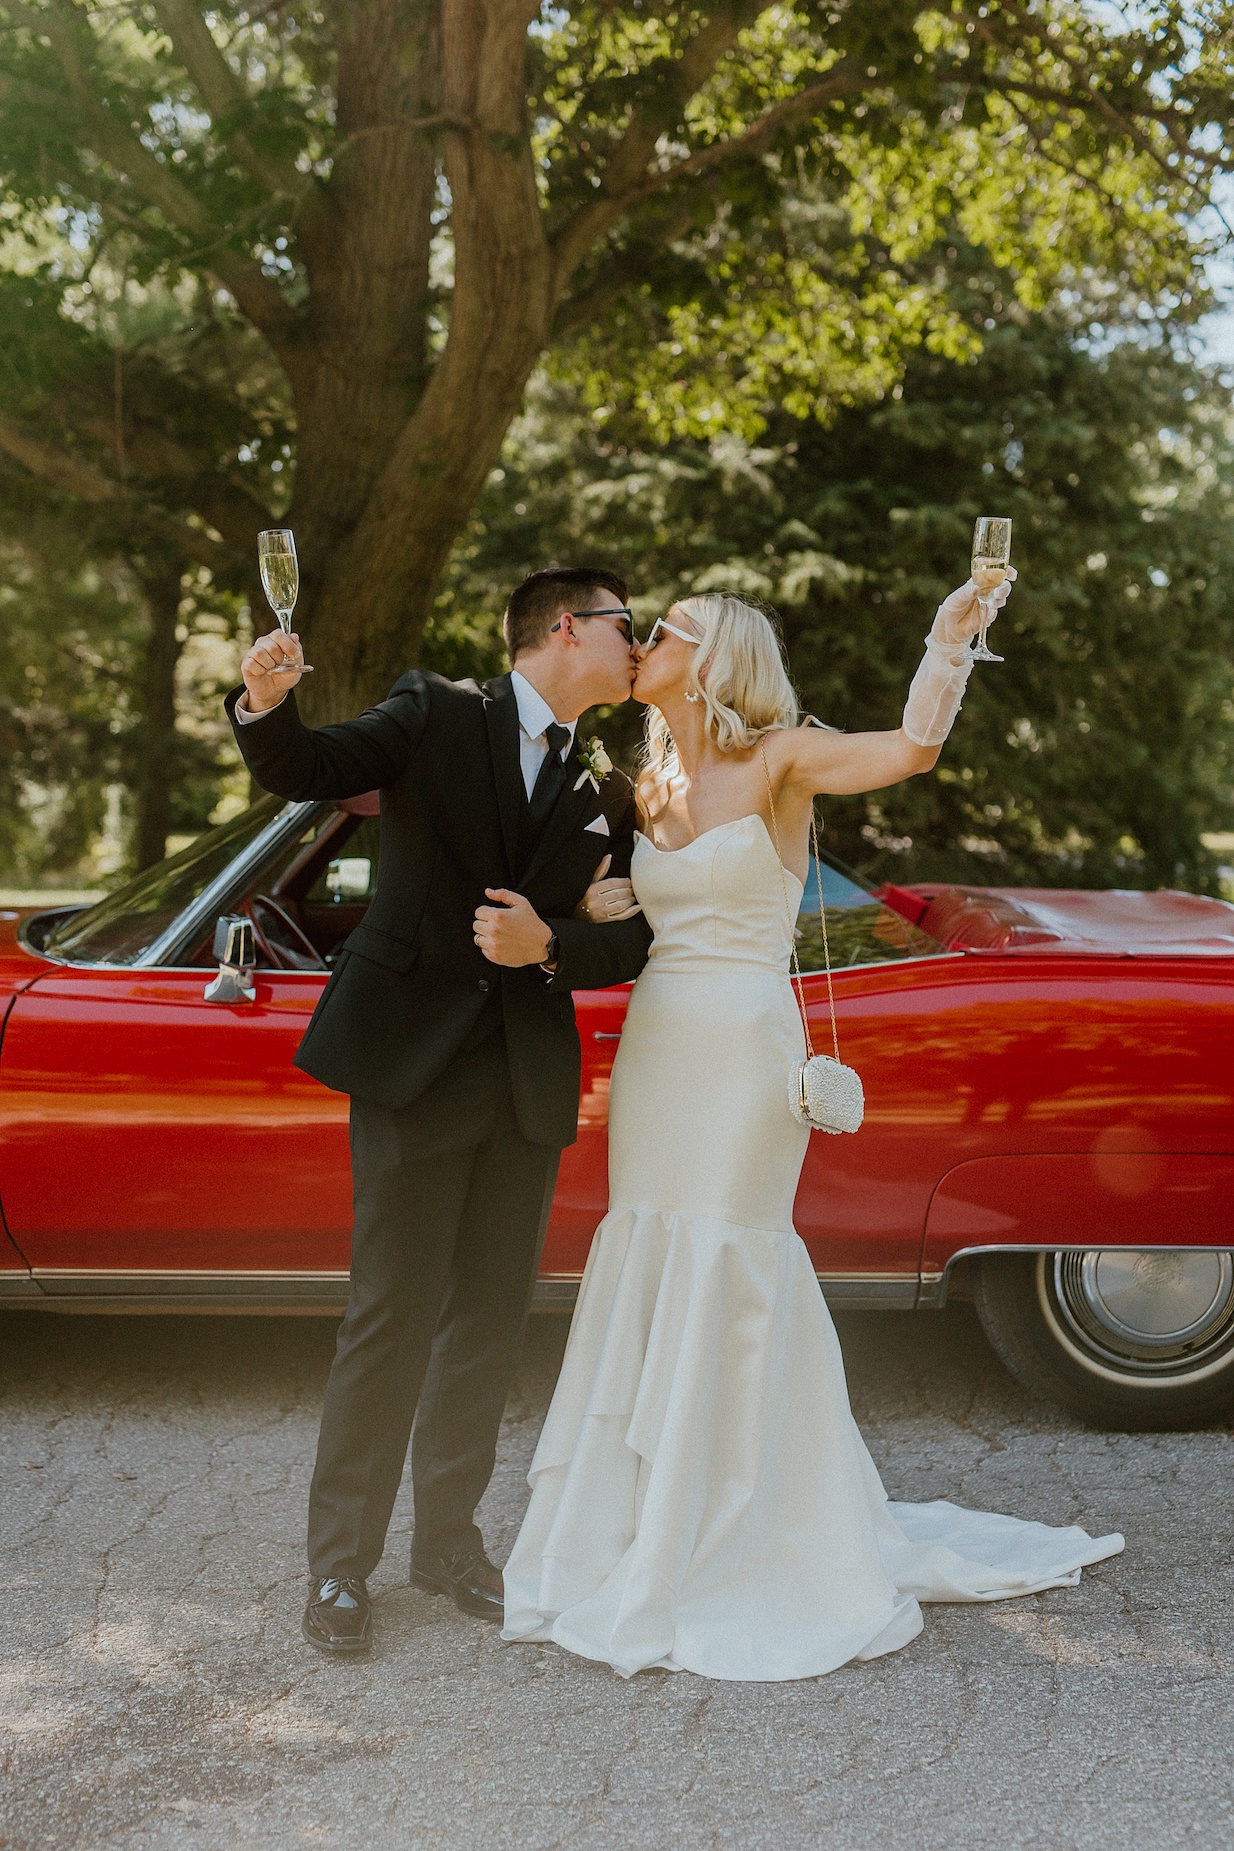 bride and groom celebrate perfect wedding gift of champagne glasses near red classic car